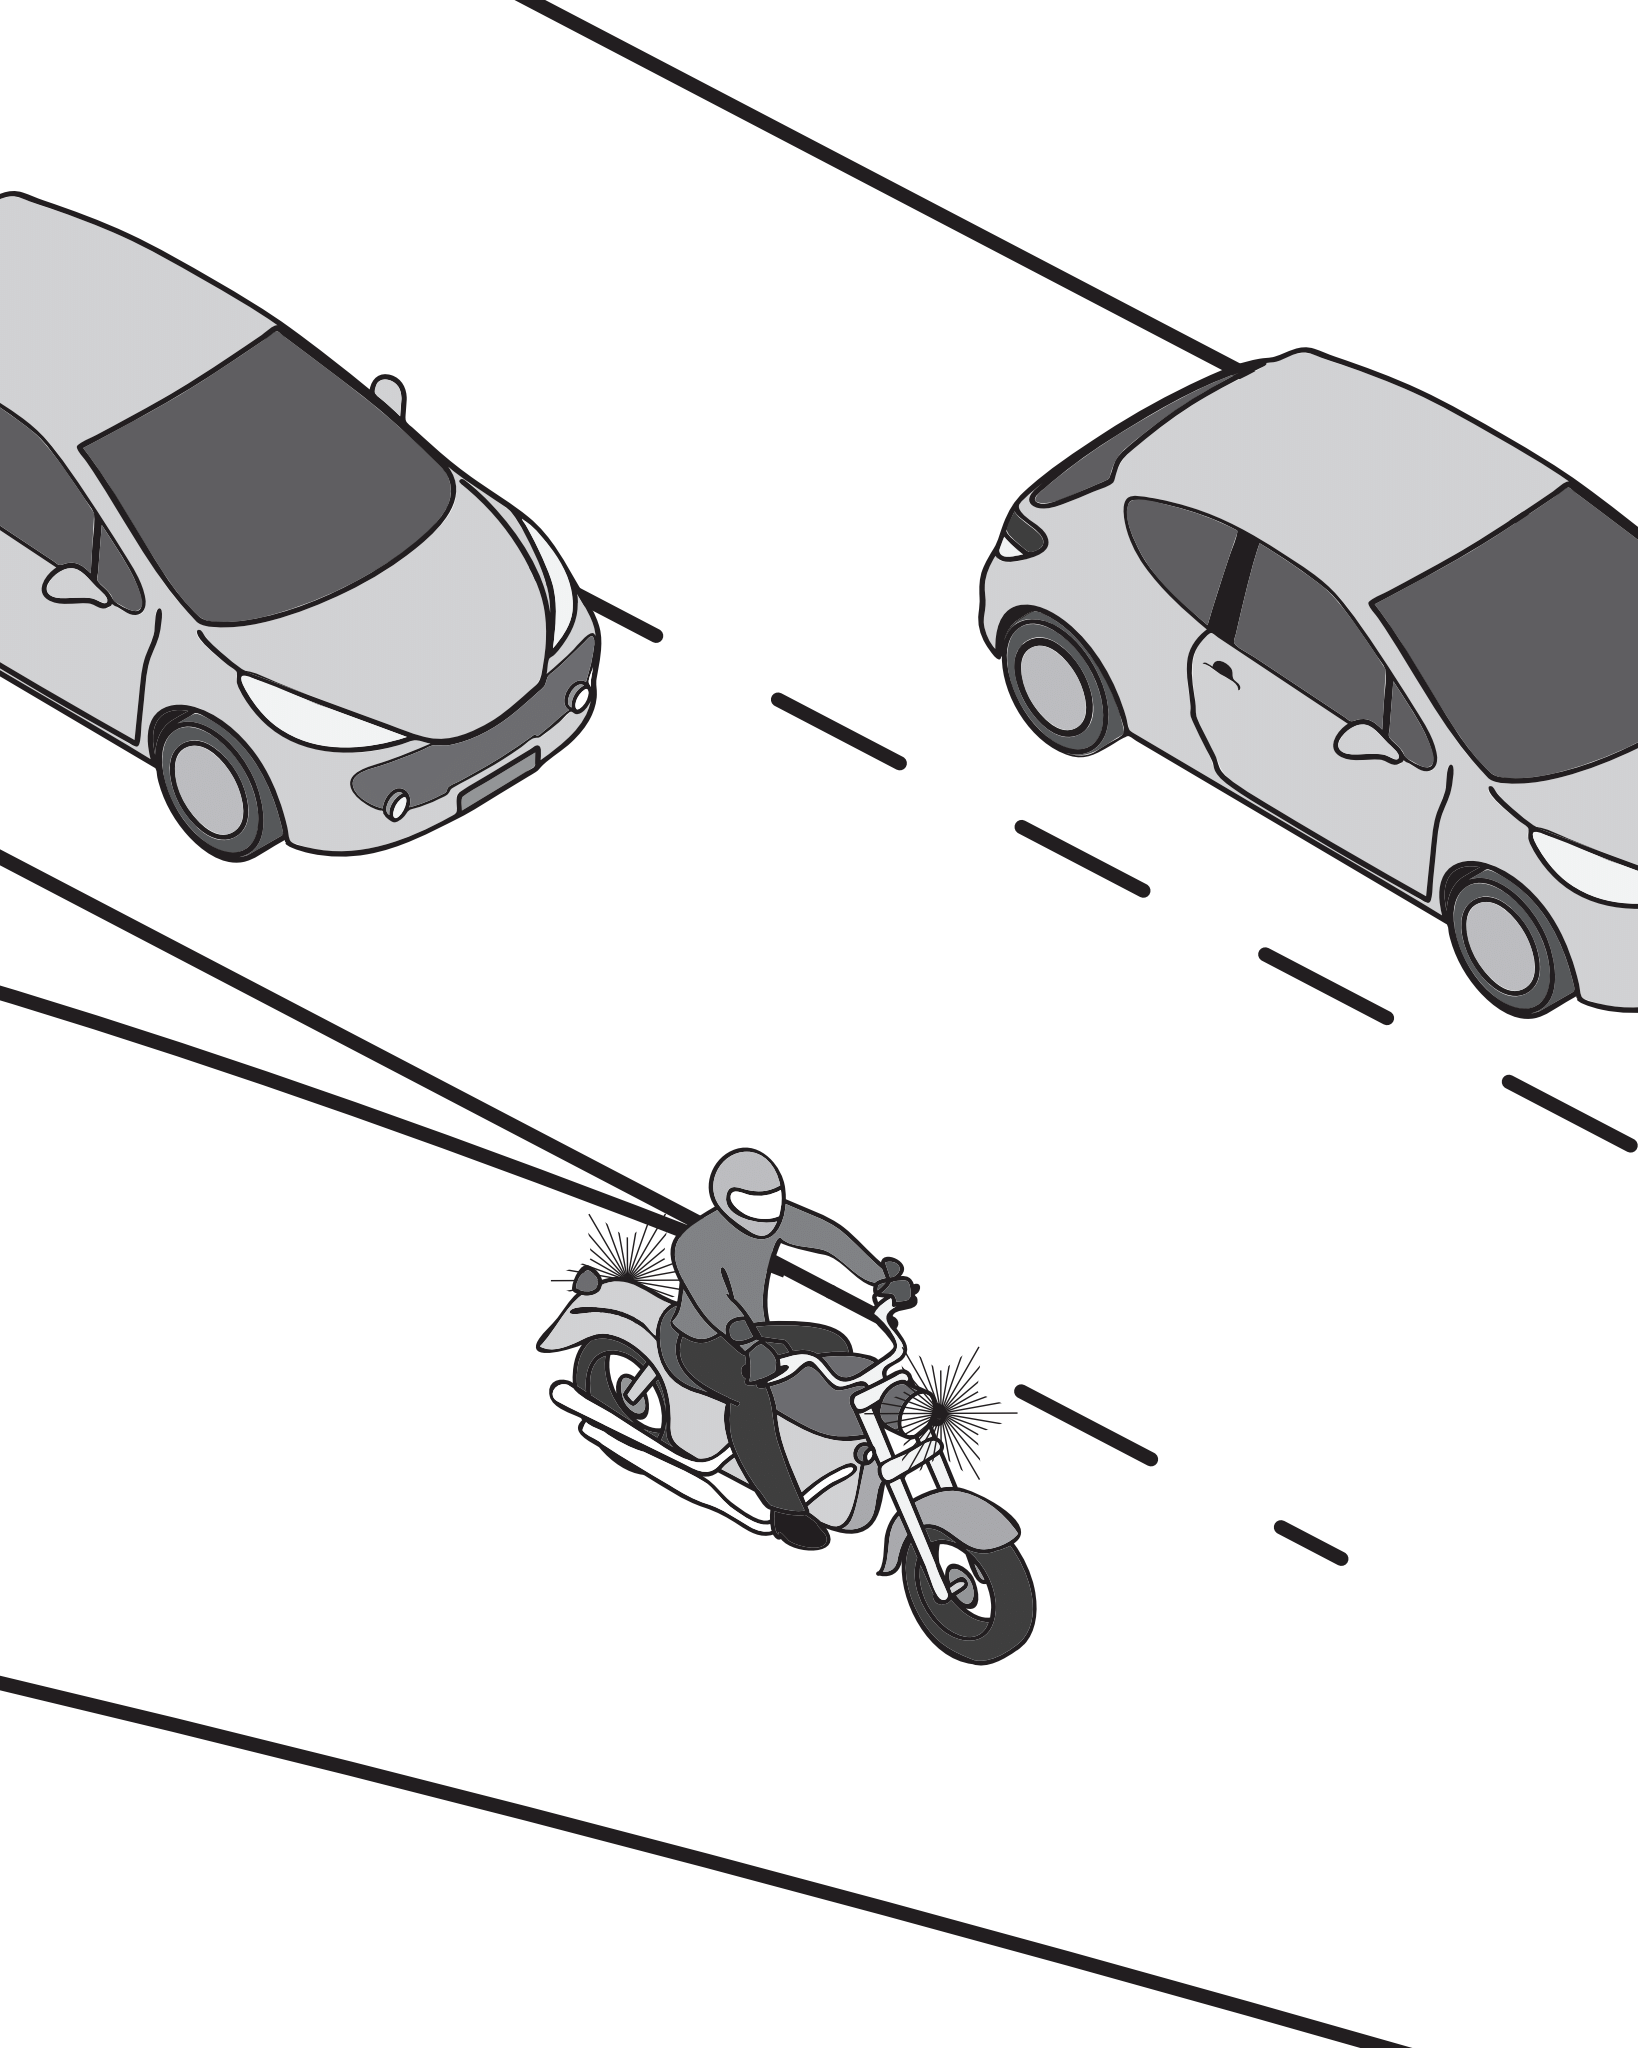 image of a mototrcycle using signals and merging onto a roadway with cars